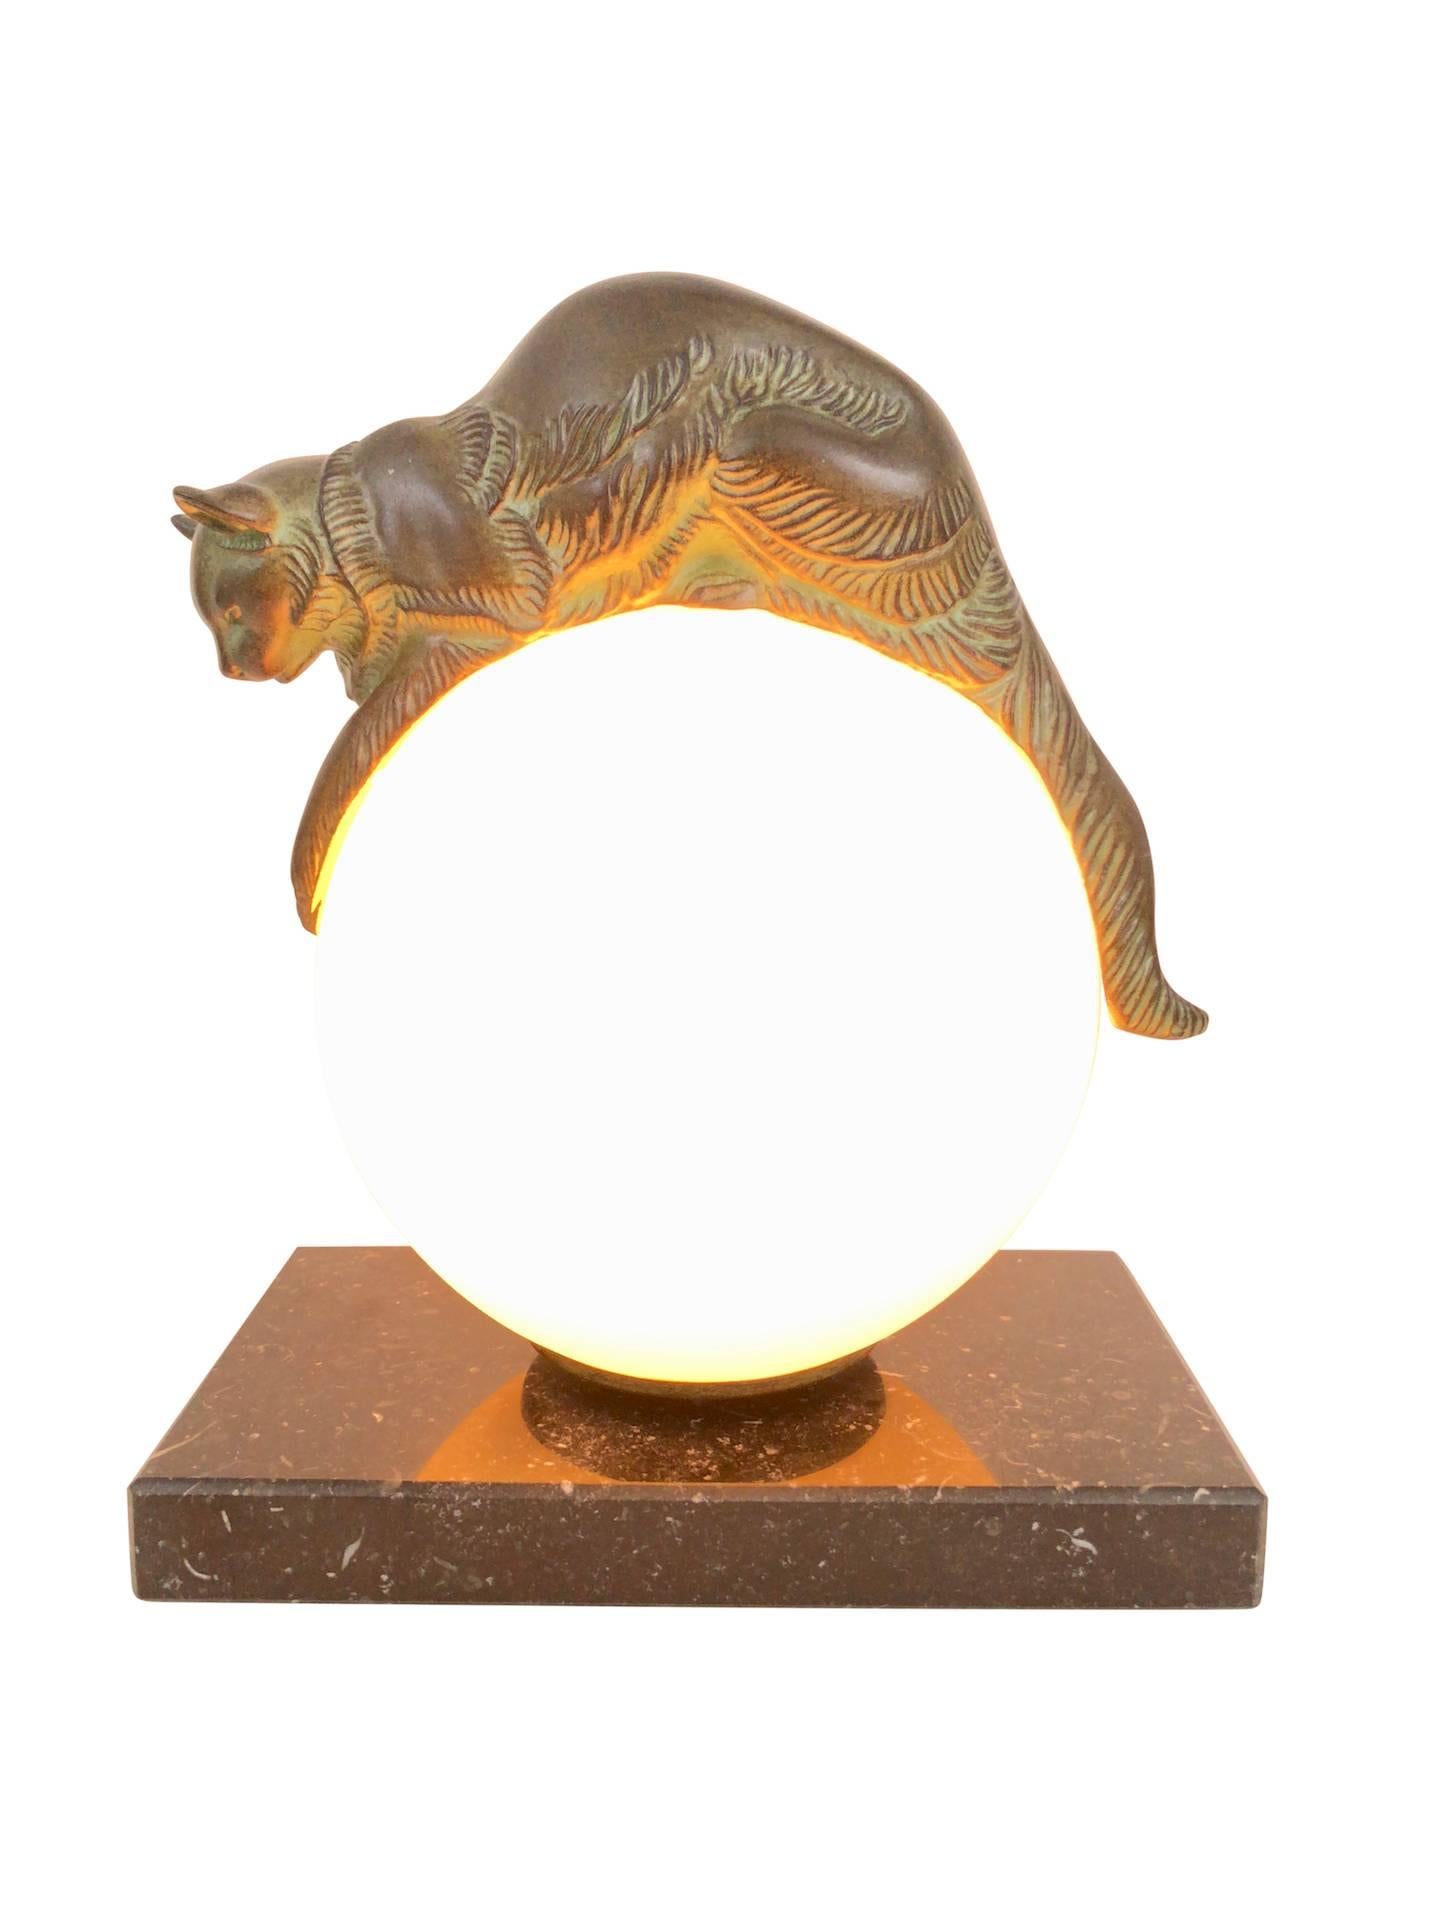 Table Lamp, Equilibre, Cat on Glass Ball by Gaillard, Original Max Le Verrier 1